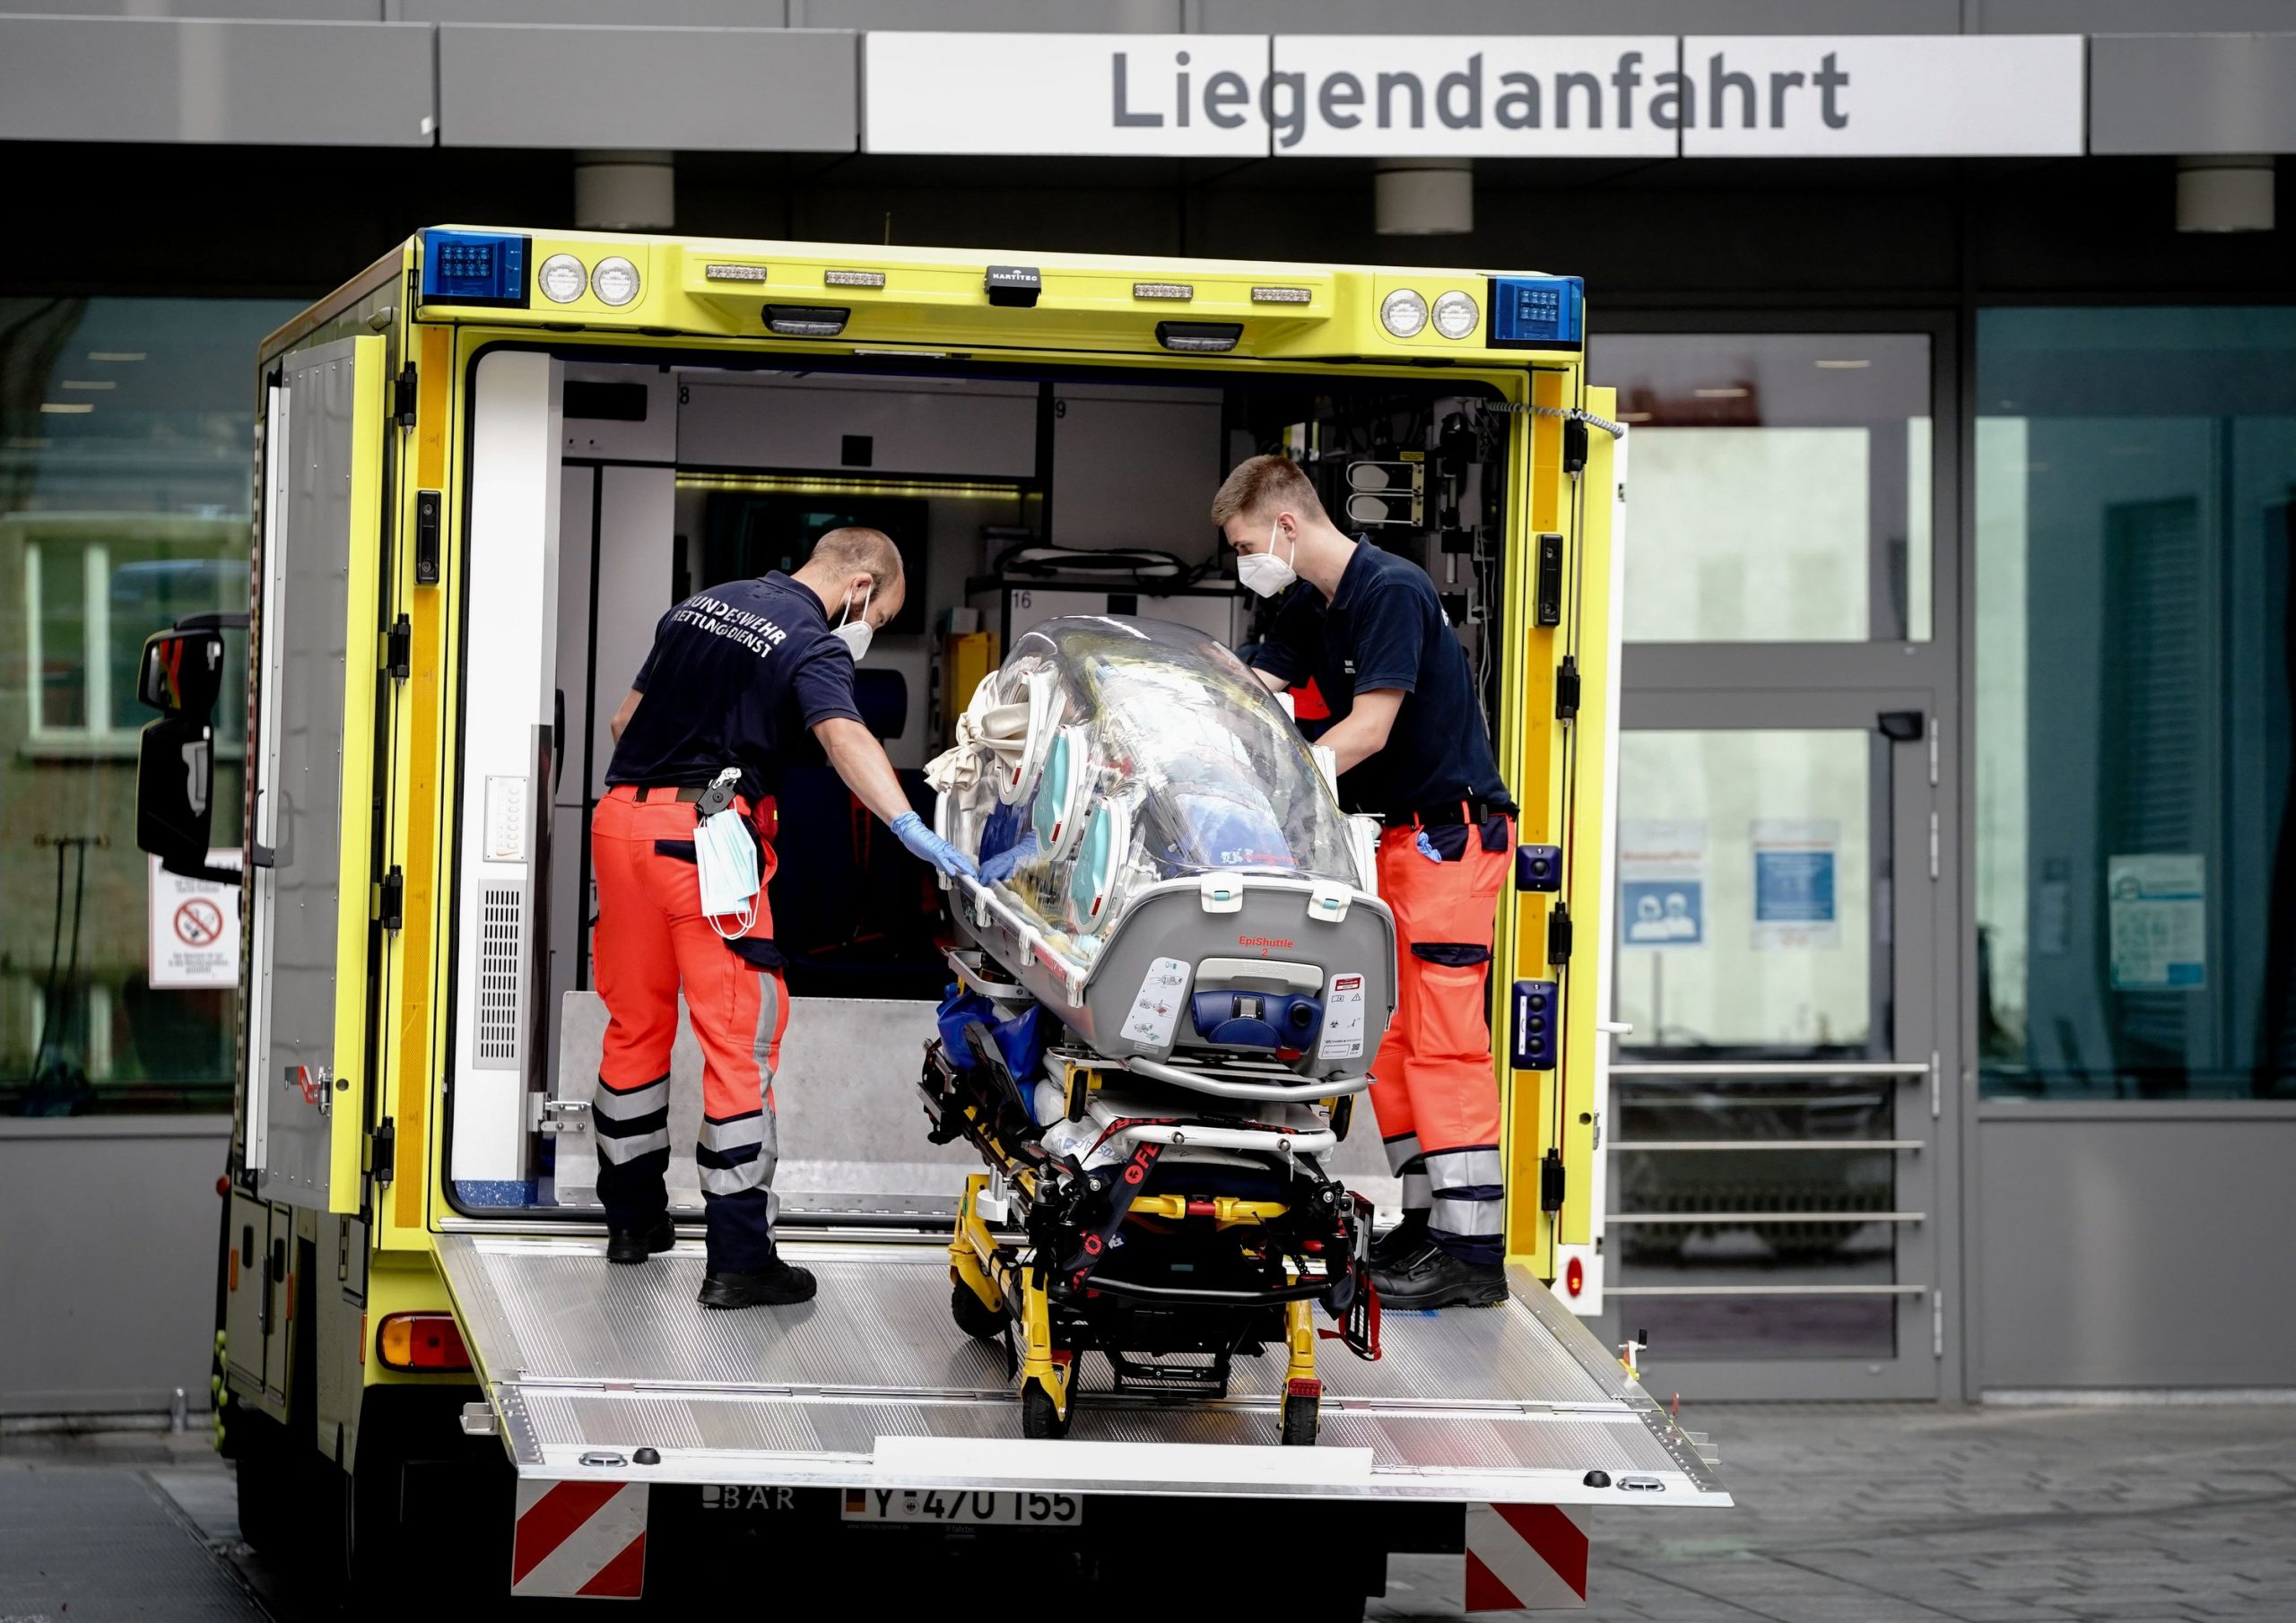 22 August 2020, Berlin: Paramedics from the Bundeswehr rescue service bring back the special stretcher, with which the Russian opposition activist Alexei Navalny was transferred to the Charite hospital, into the Bundeswehr intensive care transporter. Navalny arrived in Berlin for treatment, after spending two days in a Siberian hospital in a comatose condition following a possible poisoning on Thursday. Photo: Kay Nietfeld/dpa